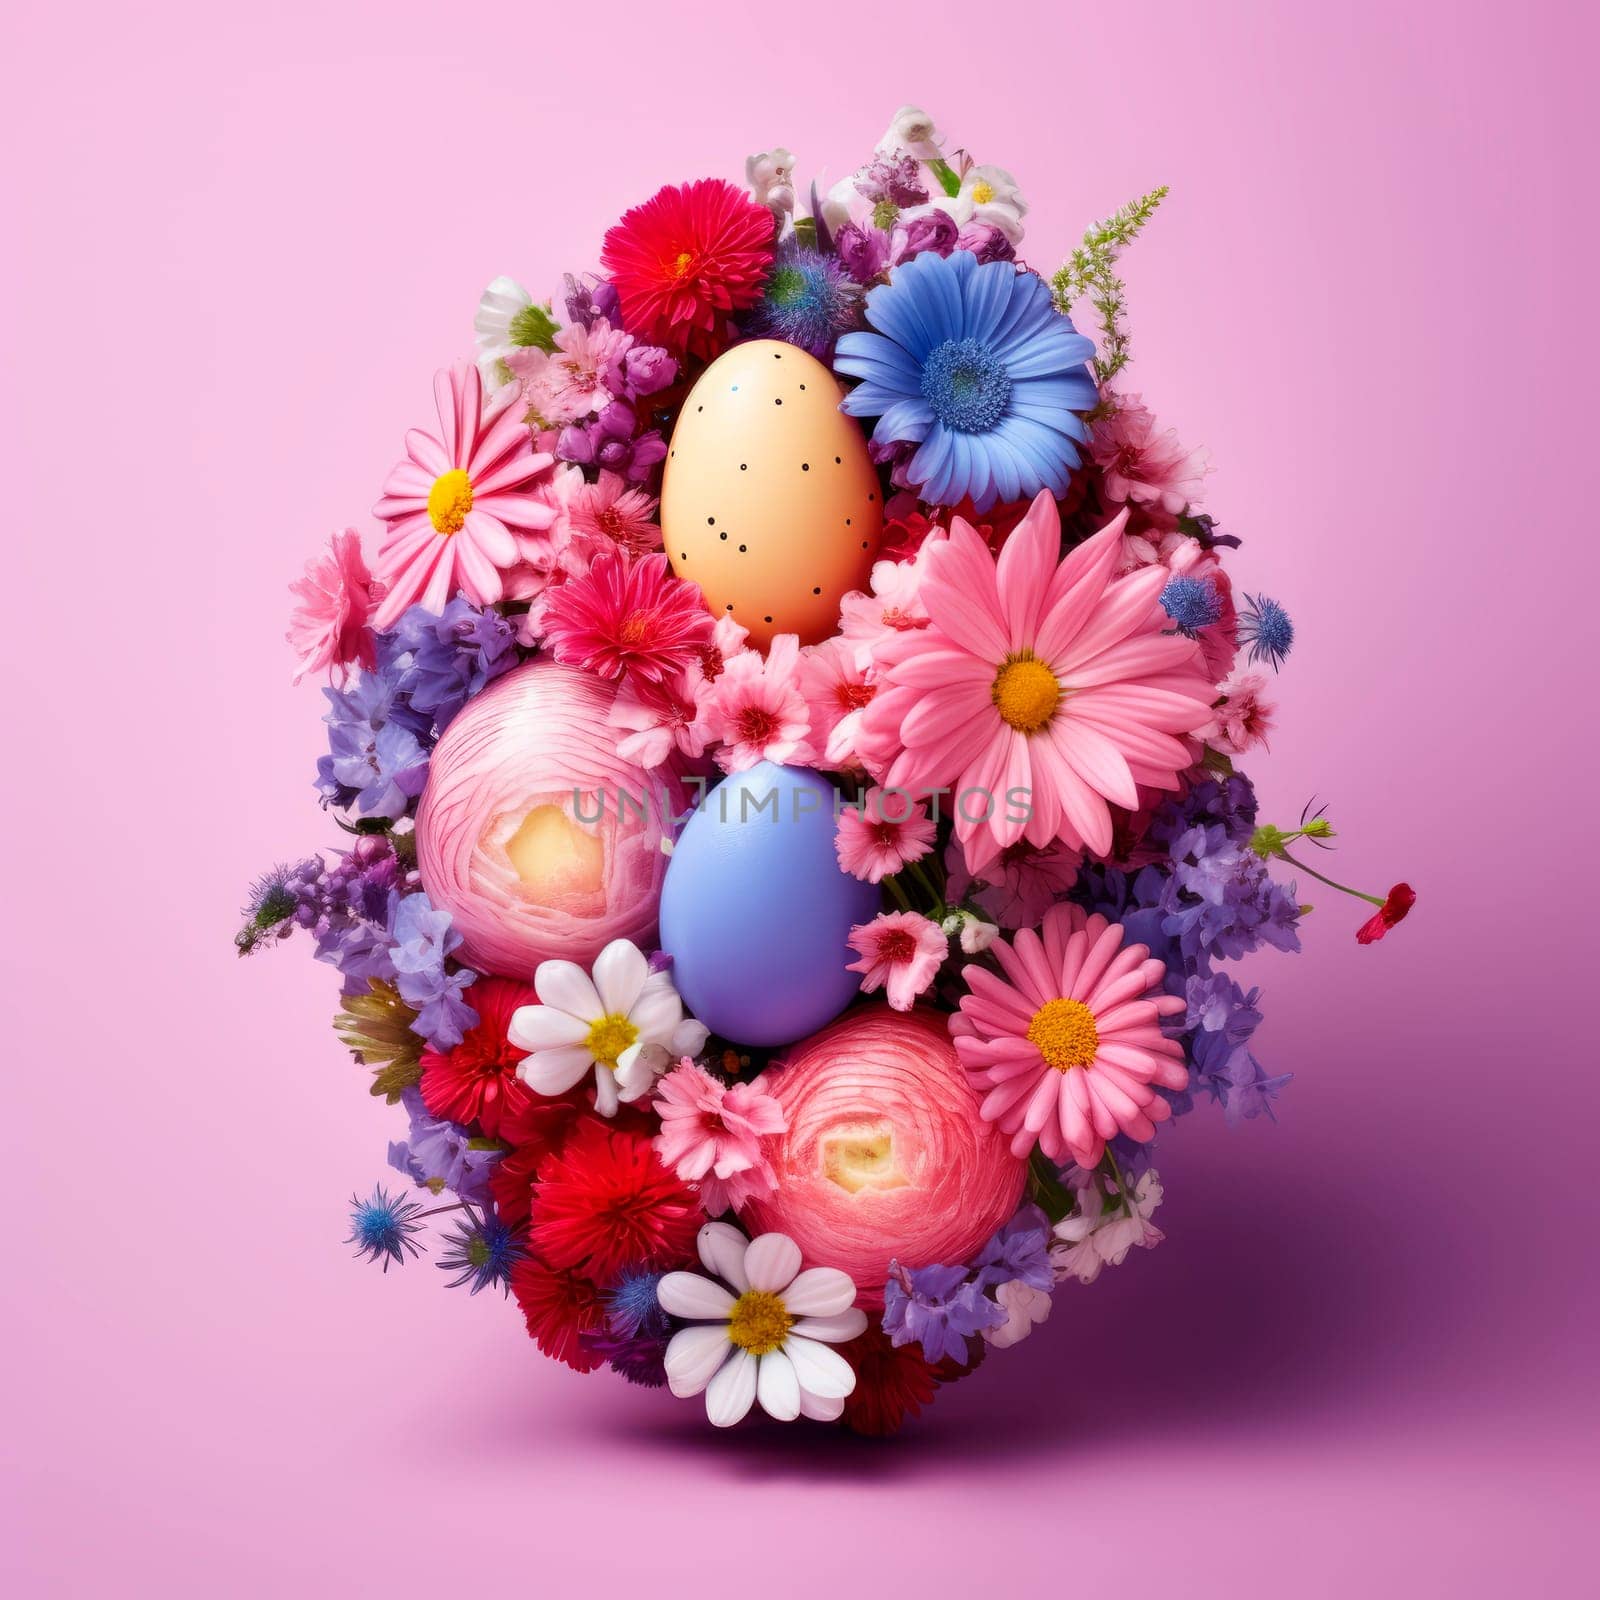 Easter creative composition with Easter eggs and spring flowers. High quality photo